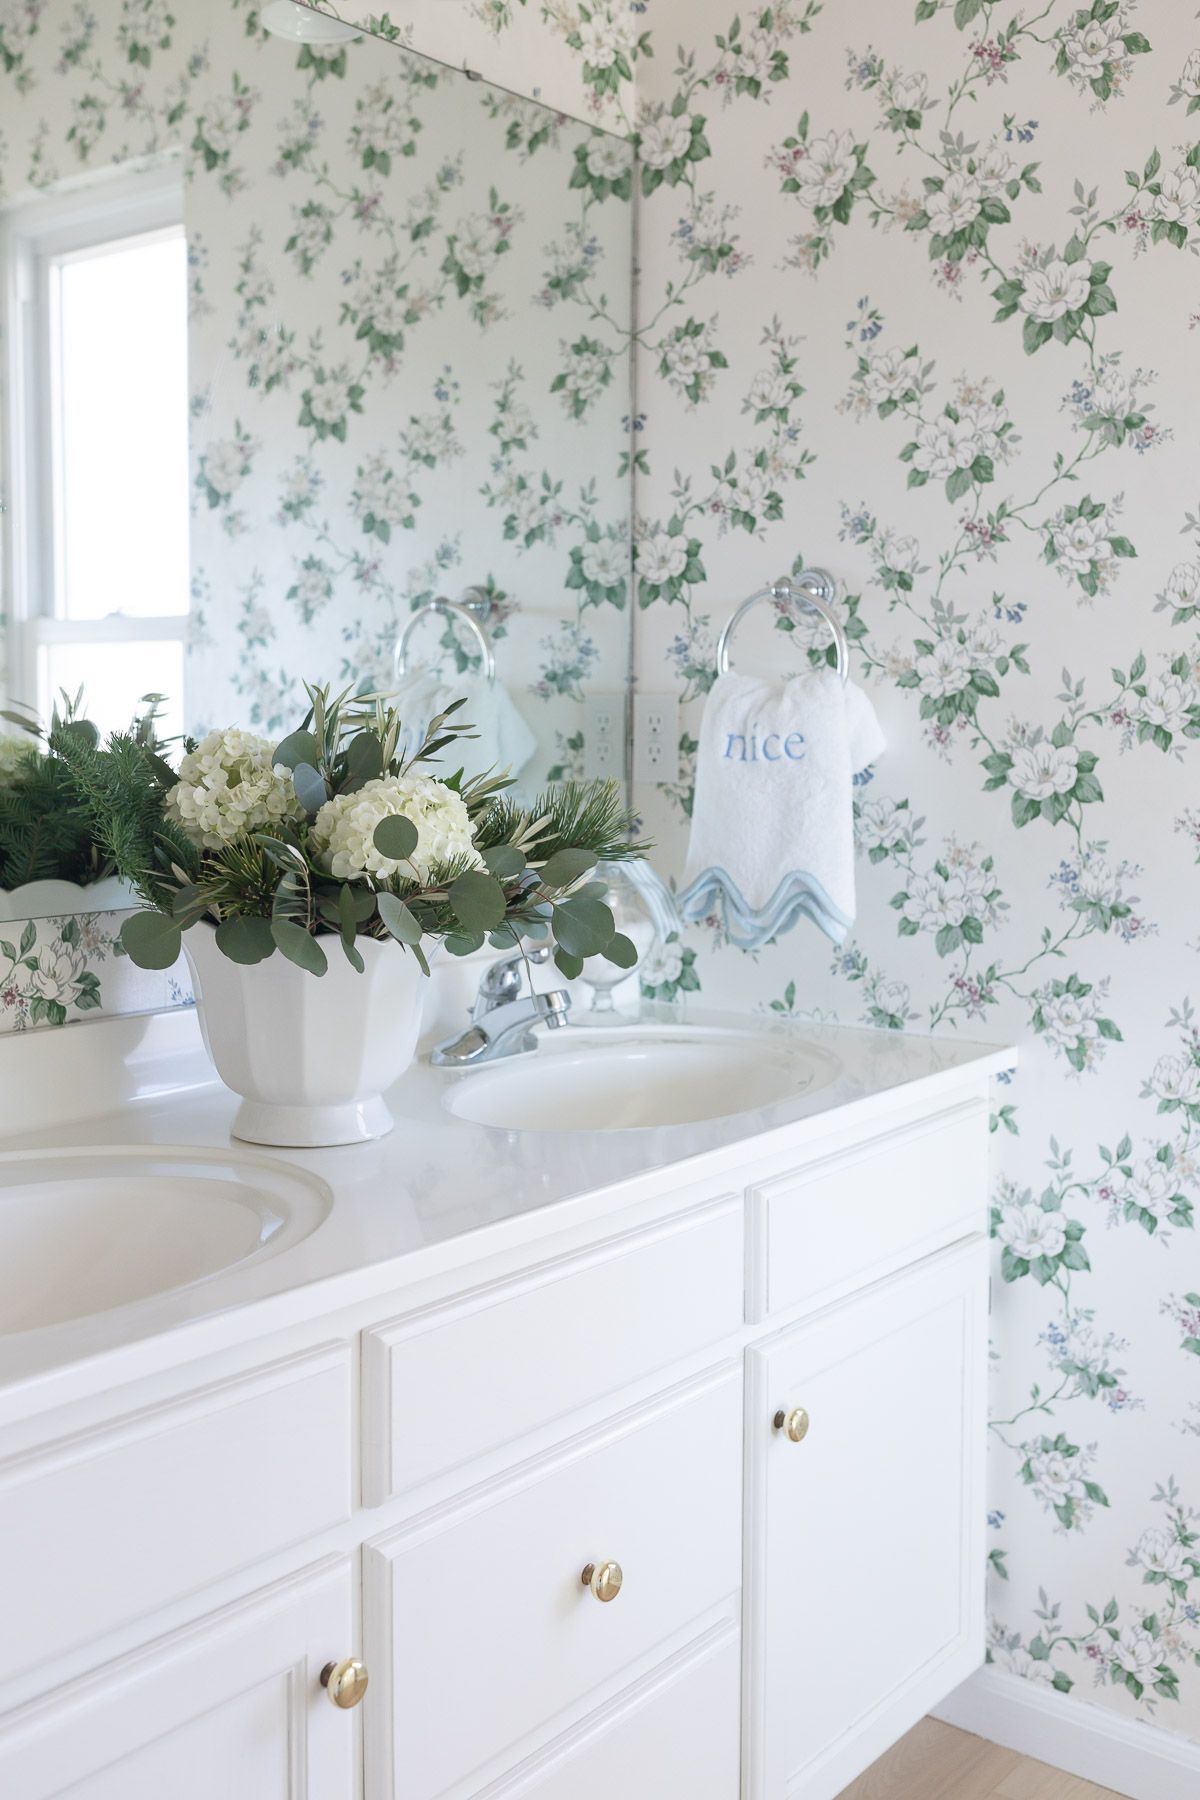 A coastal Christmas green and white coastal Christmas arrangement in a floral wallpapered bath.